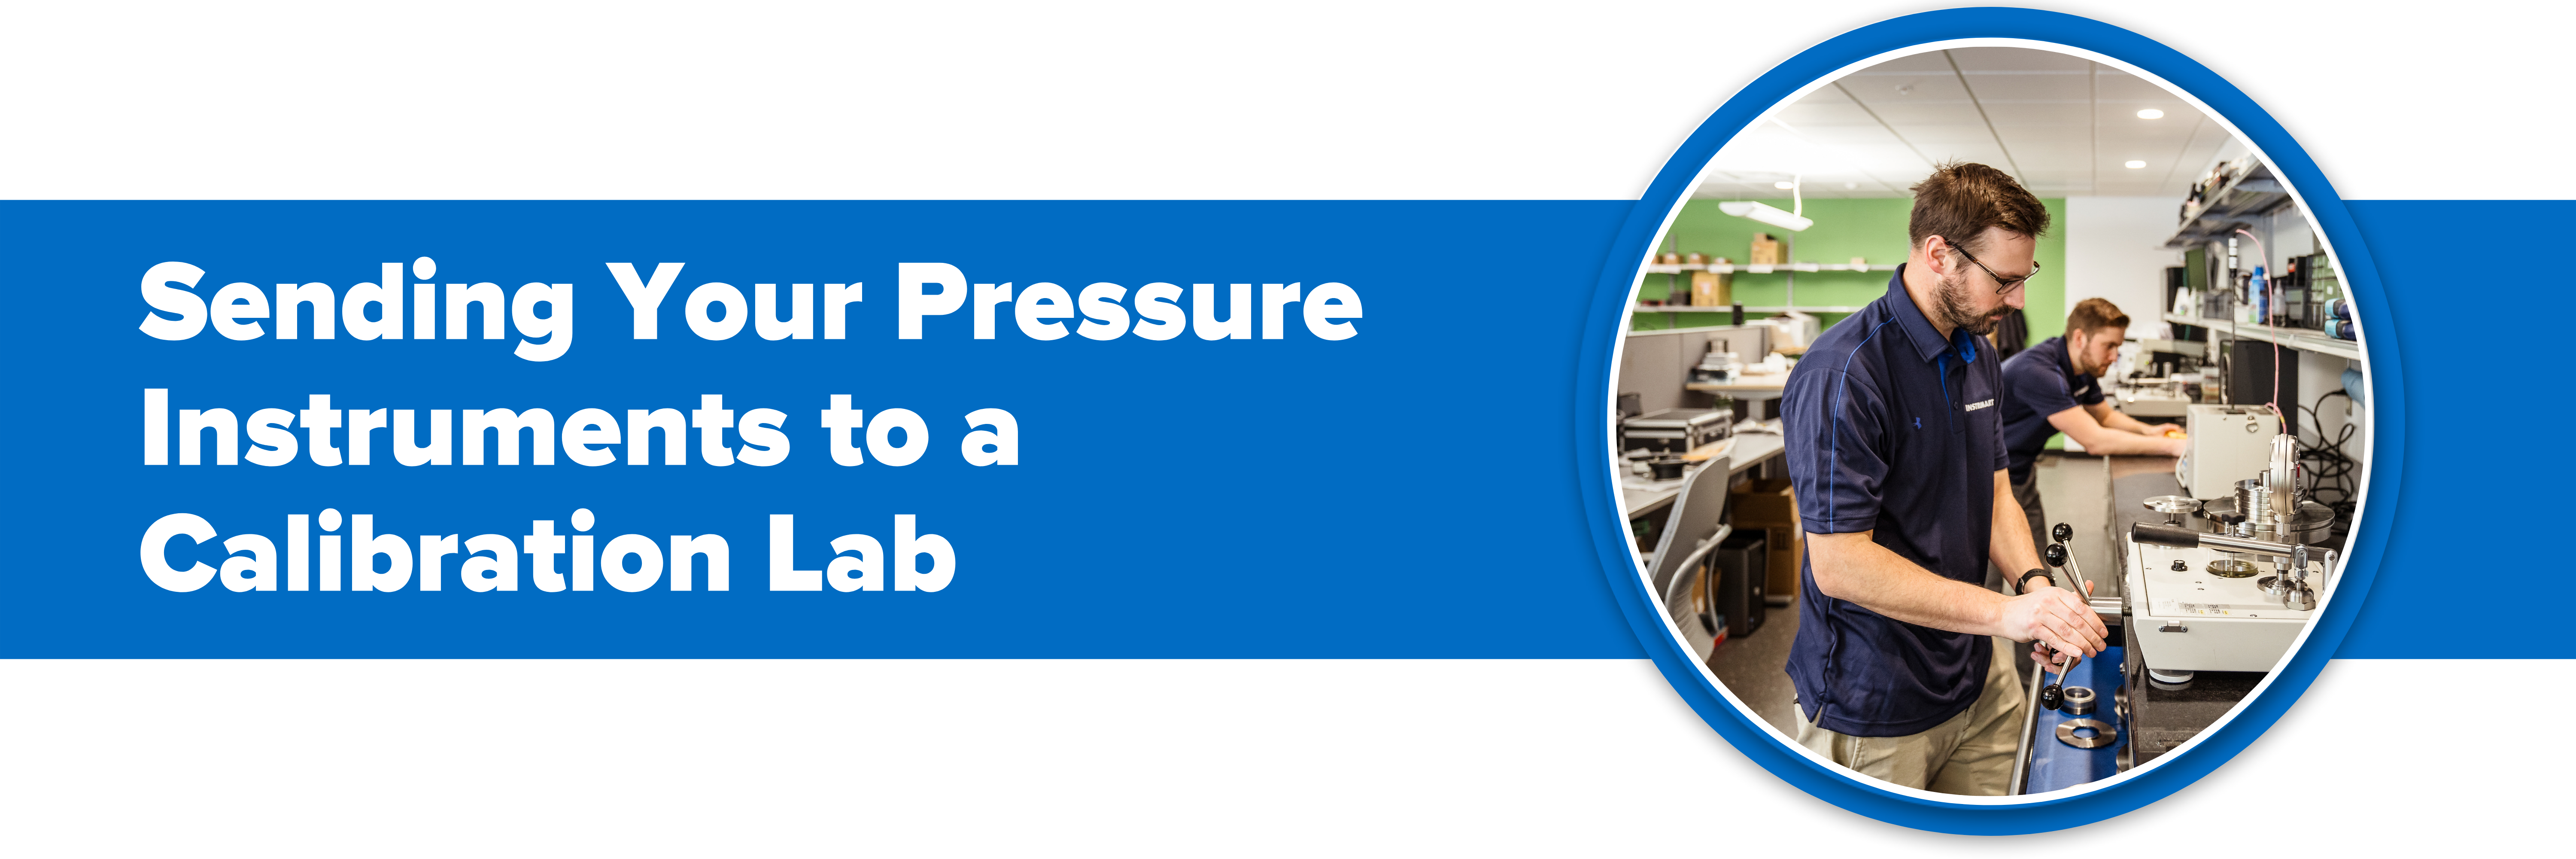 Header image with text "Sending Your Pressure Instruments to a Calibration Lab"